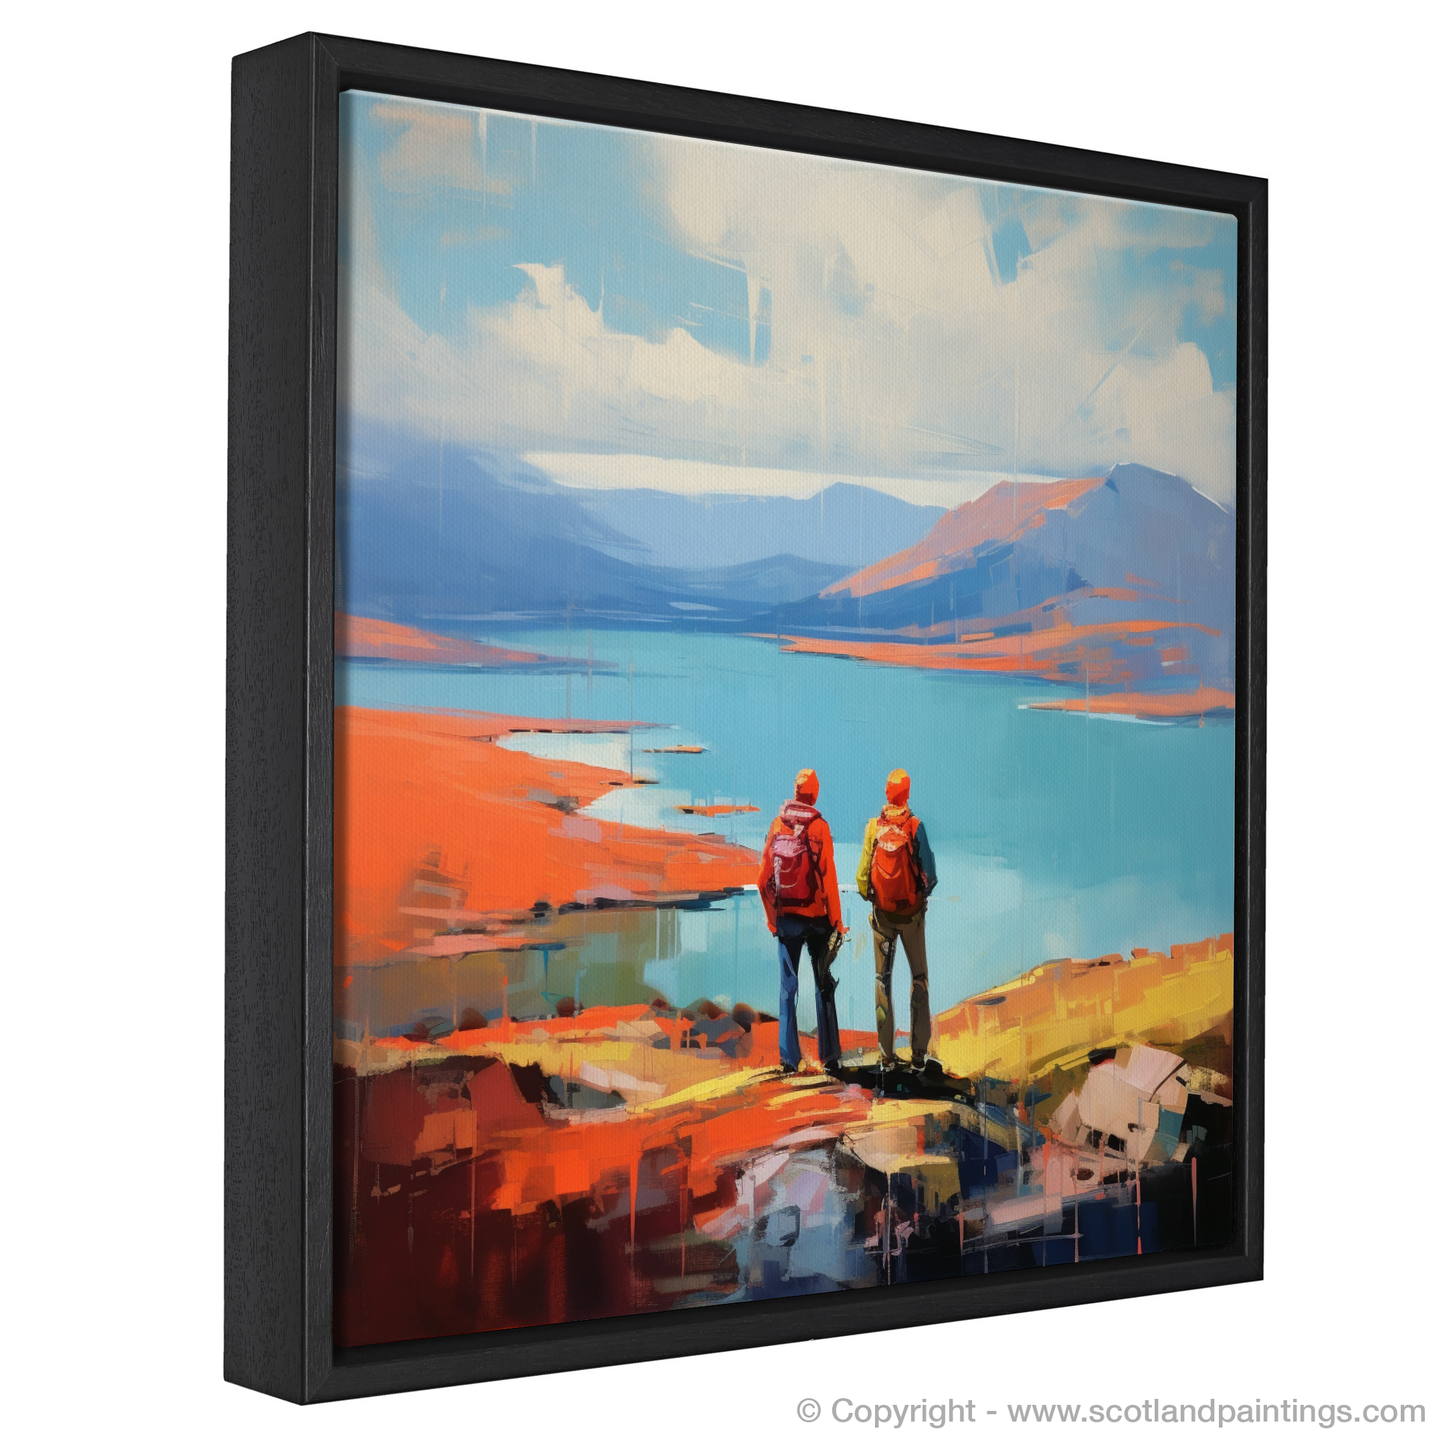 Painting and Art Print of Two hikers looking out on Loch Lomond entitled "Hikers' Repose at Loch Lomond".